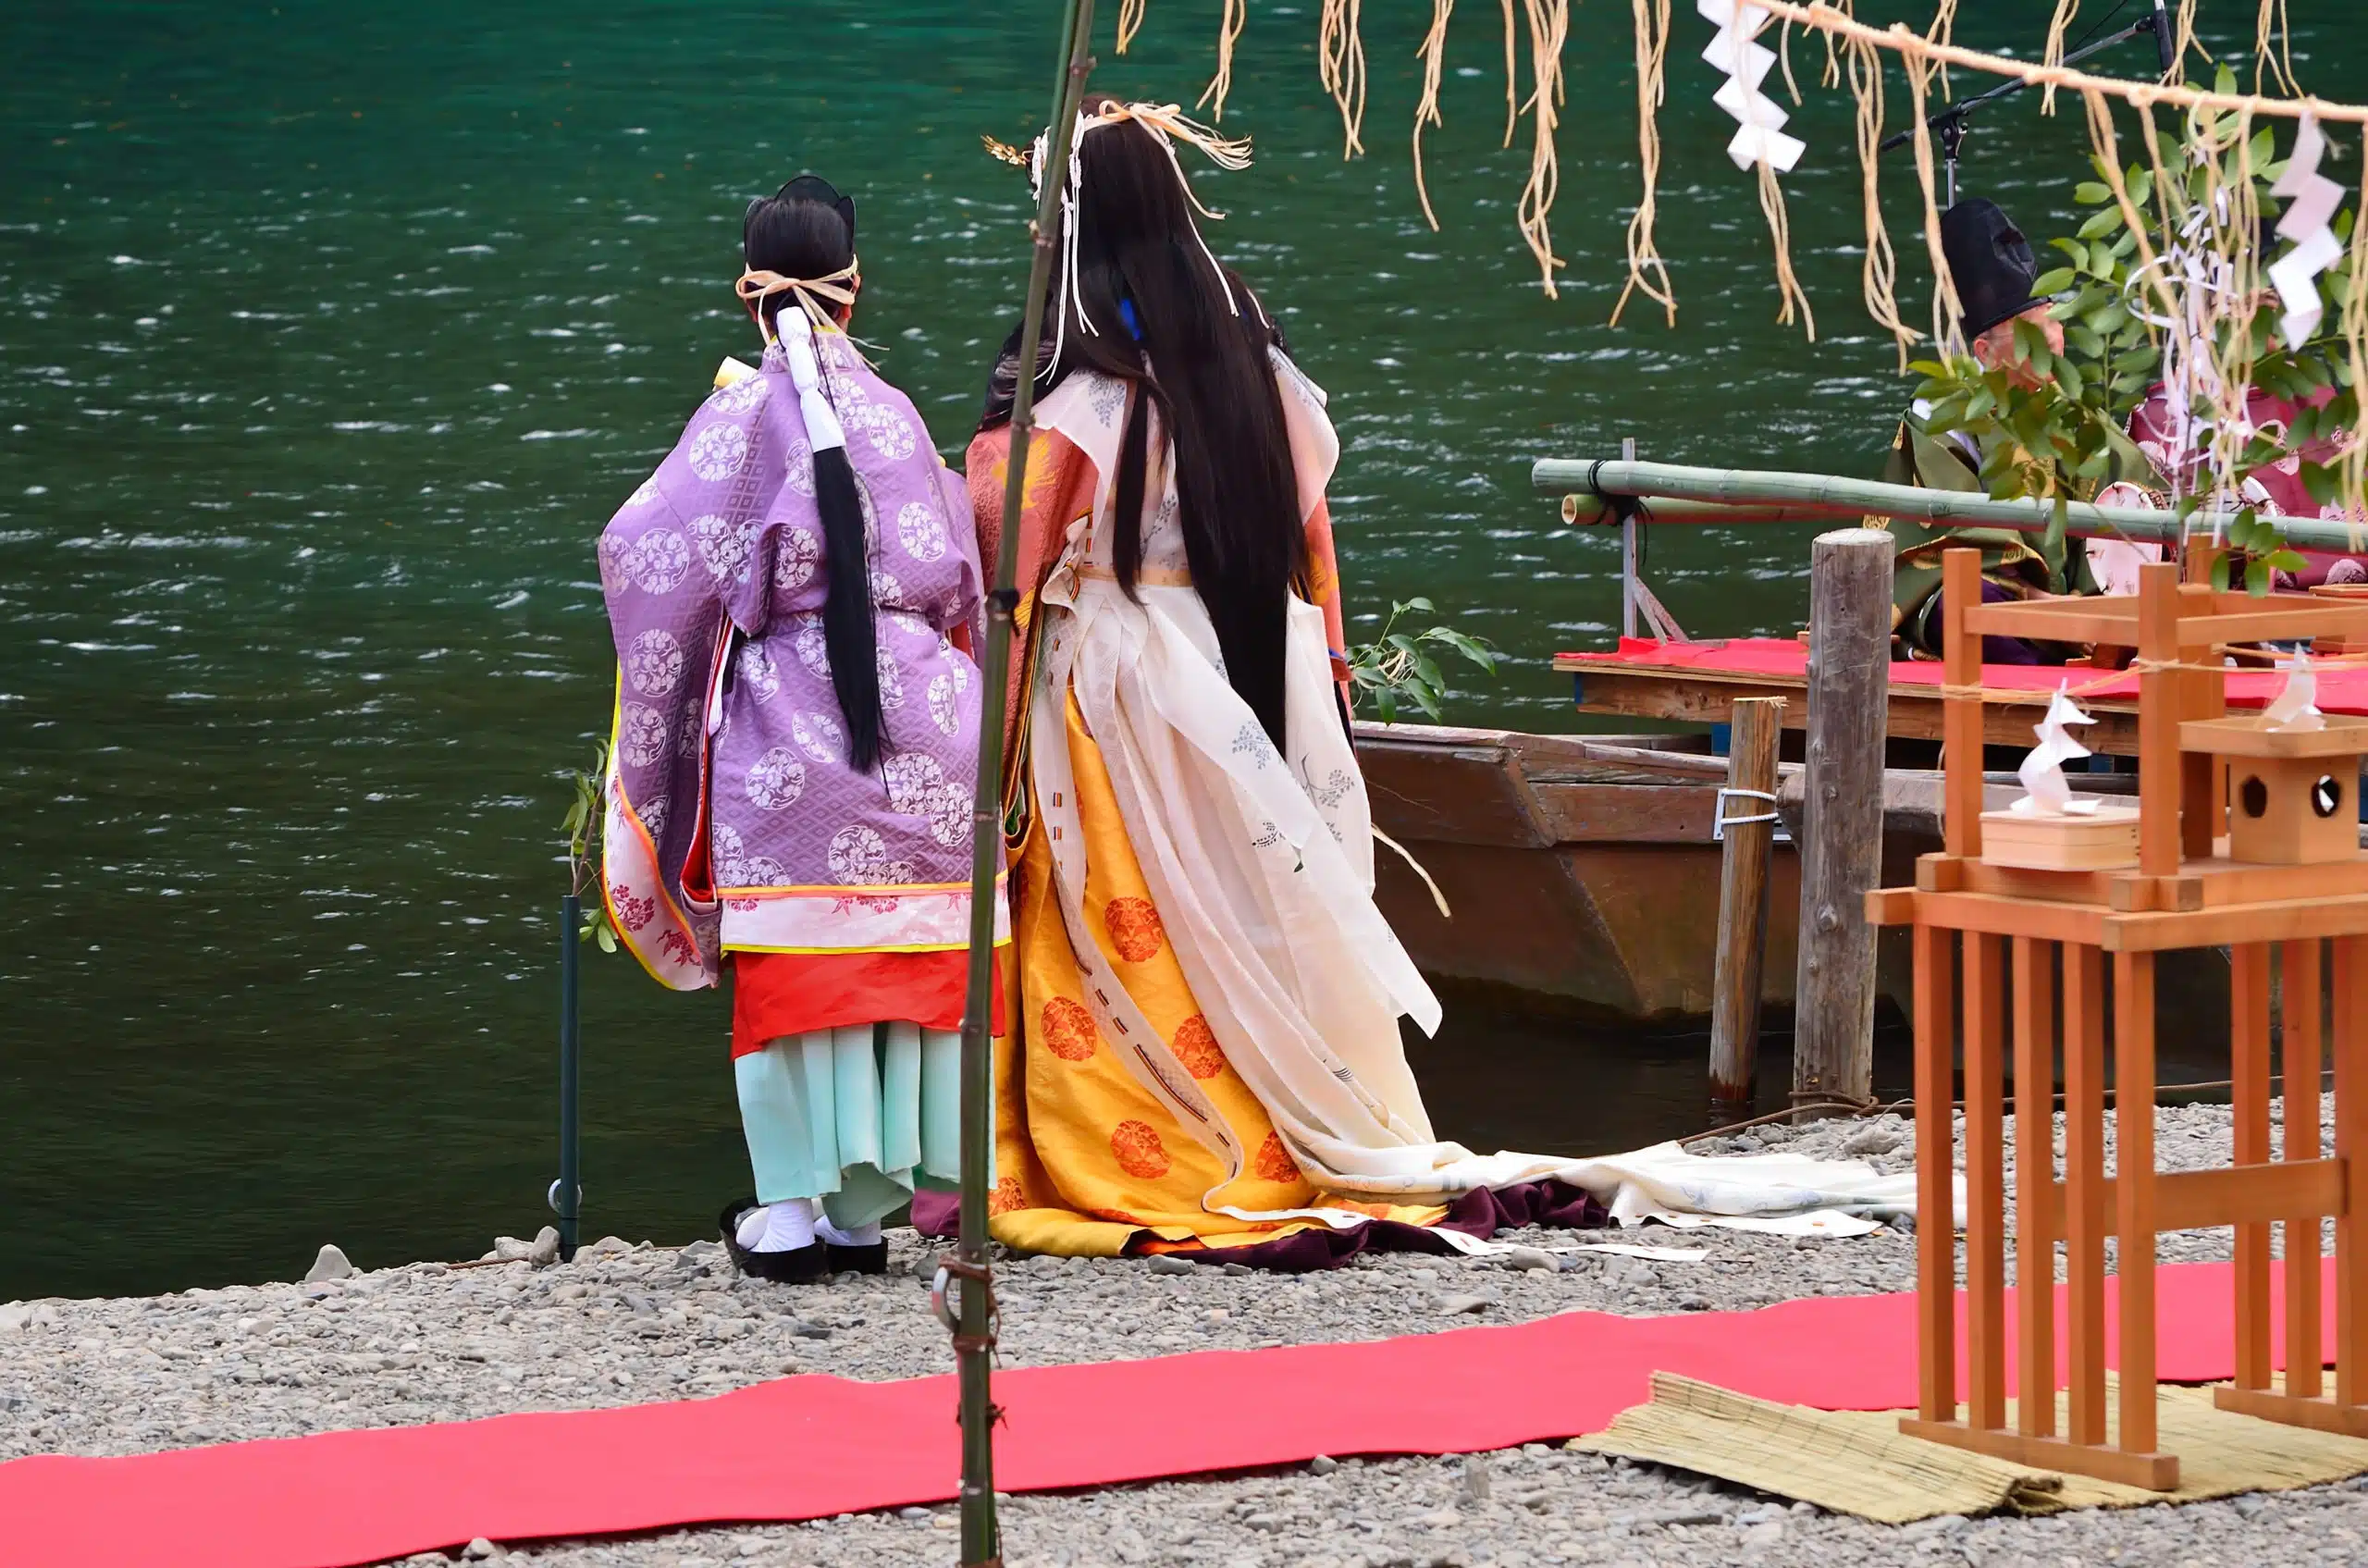 Traditional Japanese princes having a conversation by the river.